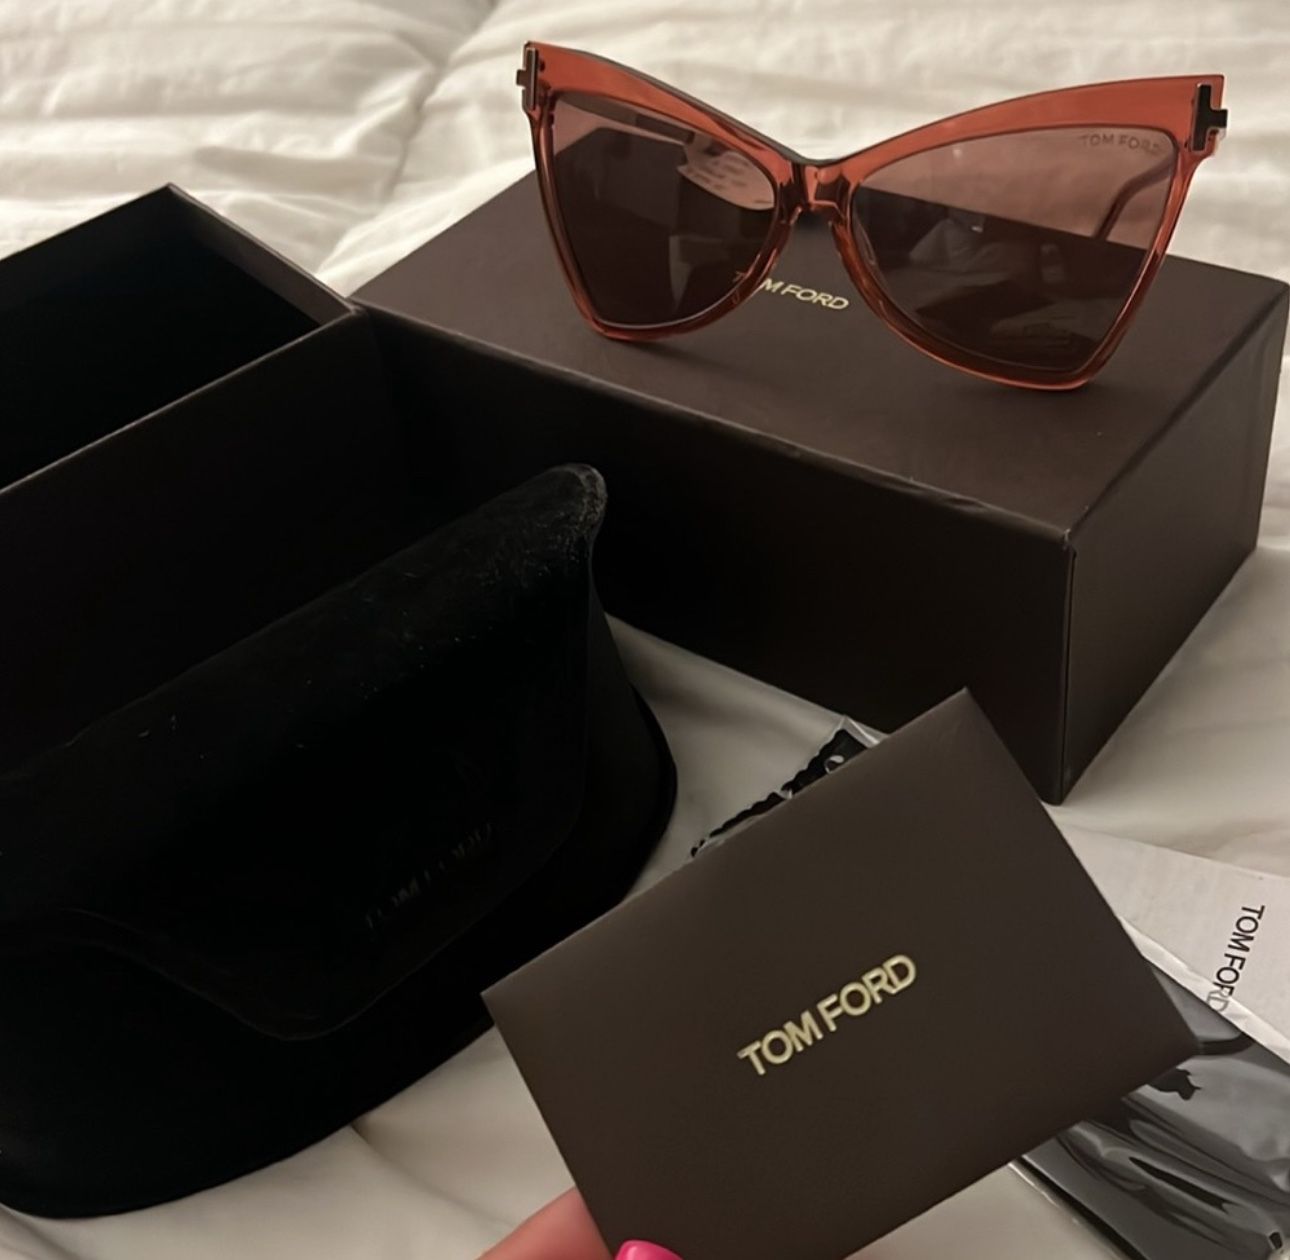 TOM FORD tallulah sunglasses NEVER WORN AUTHENTIC 